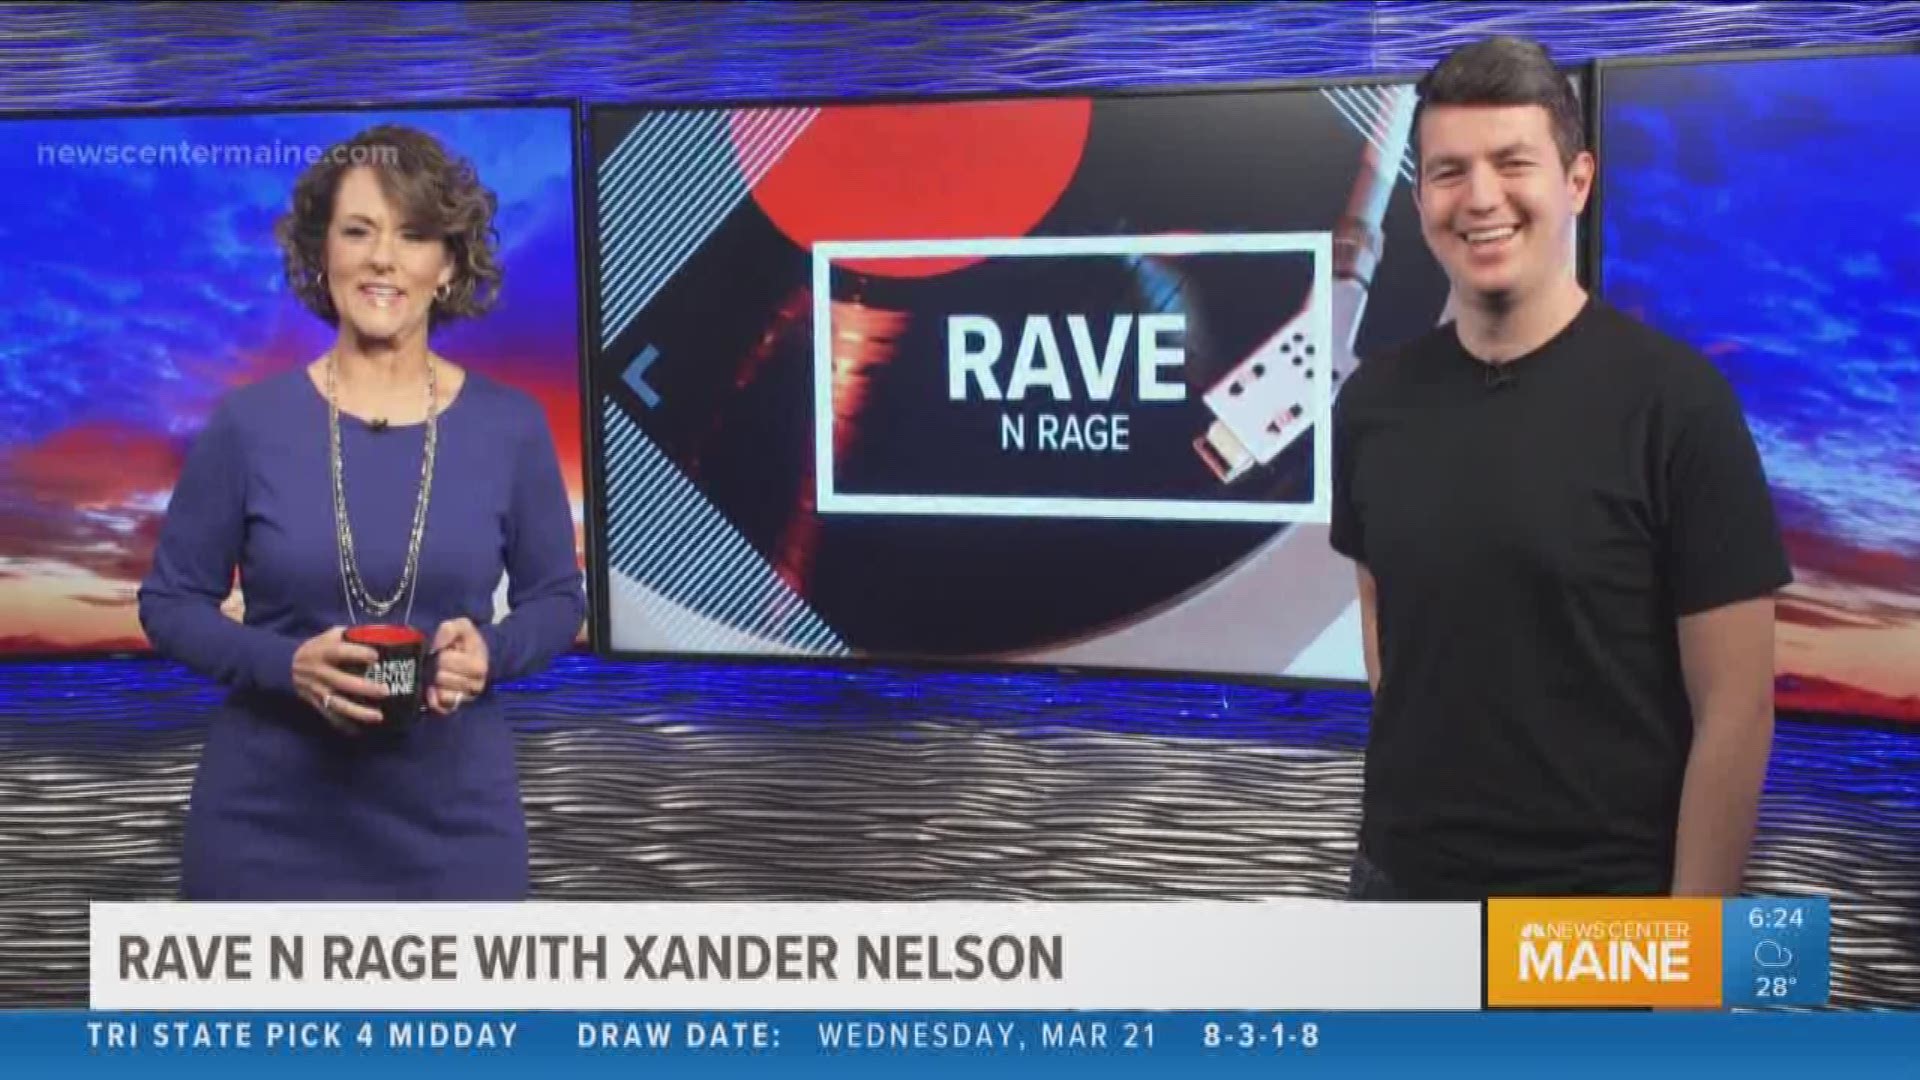 Rave N Rage with Xander Nelson